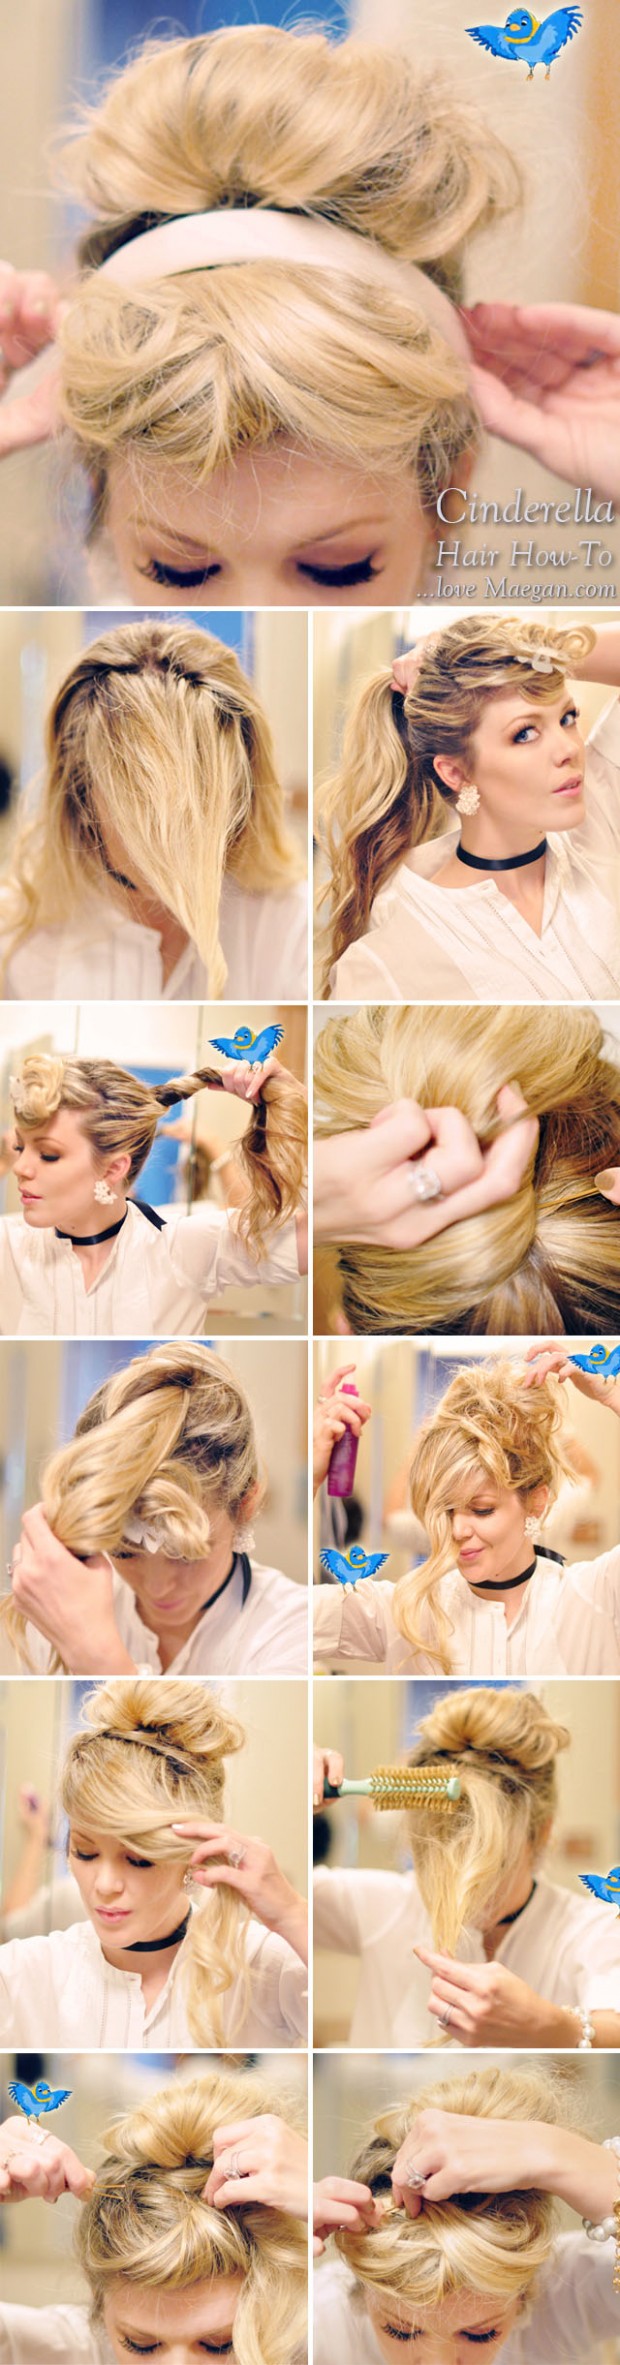 How-To Cinderella Hair and Makeup Photo Tutorial